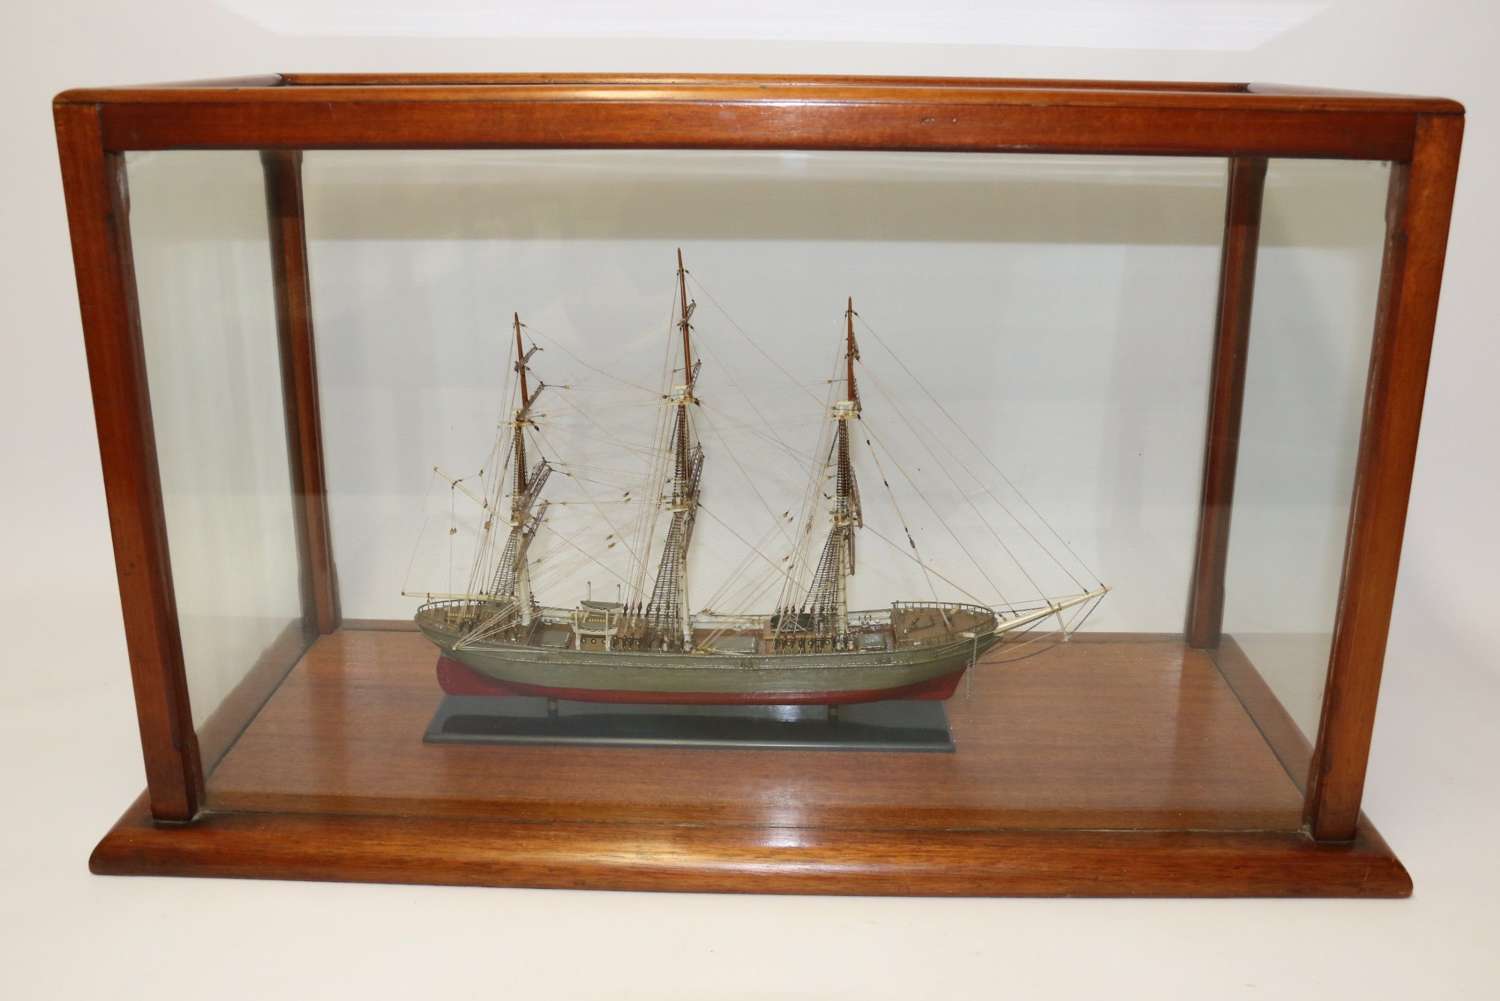 A Hand Modelled Ship In A Glass And Mahogany Case, C 1910